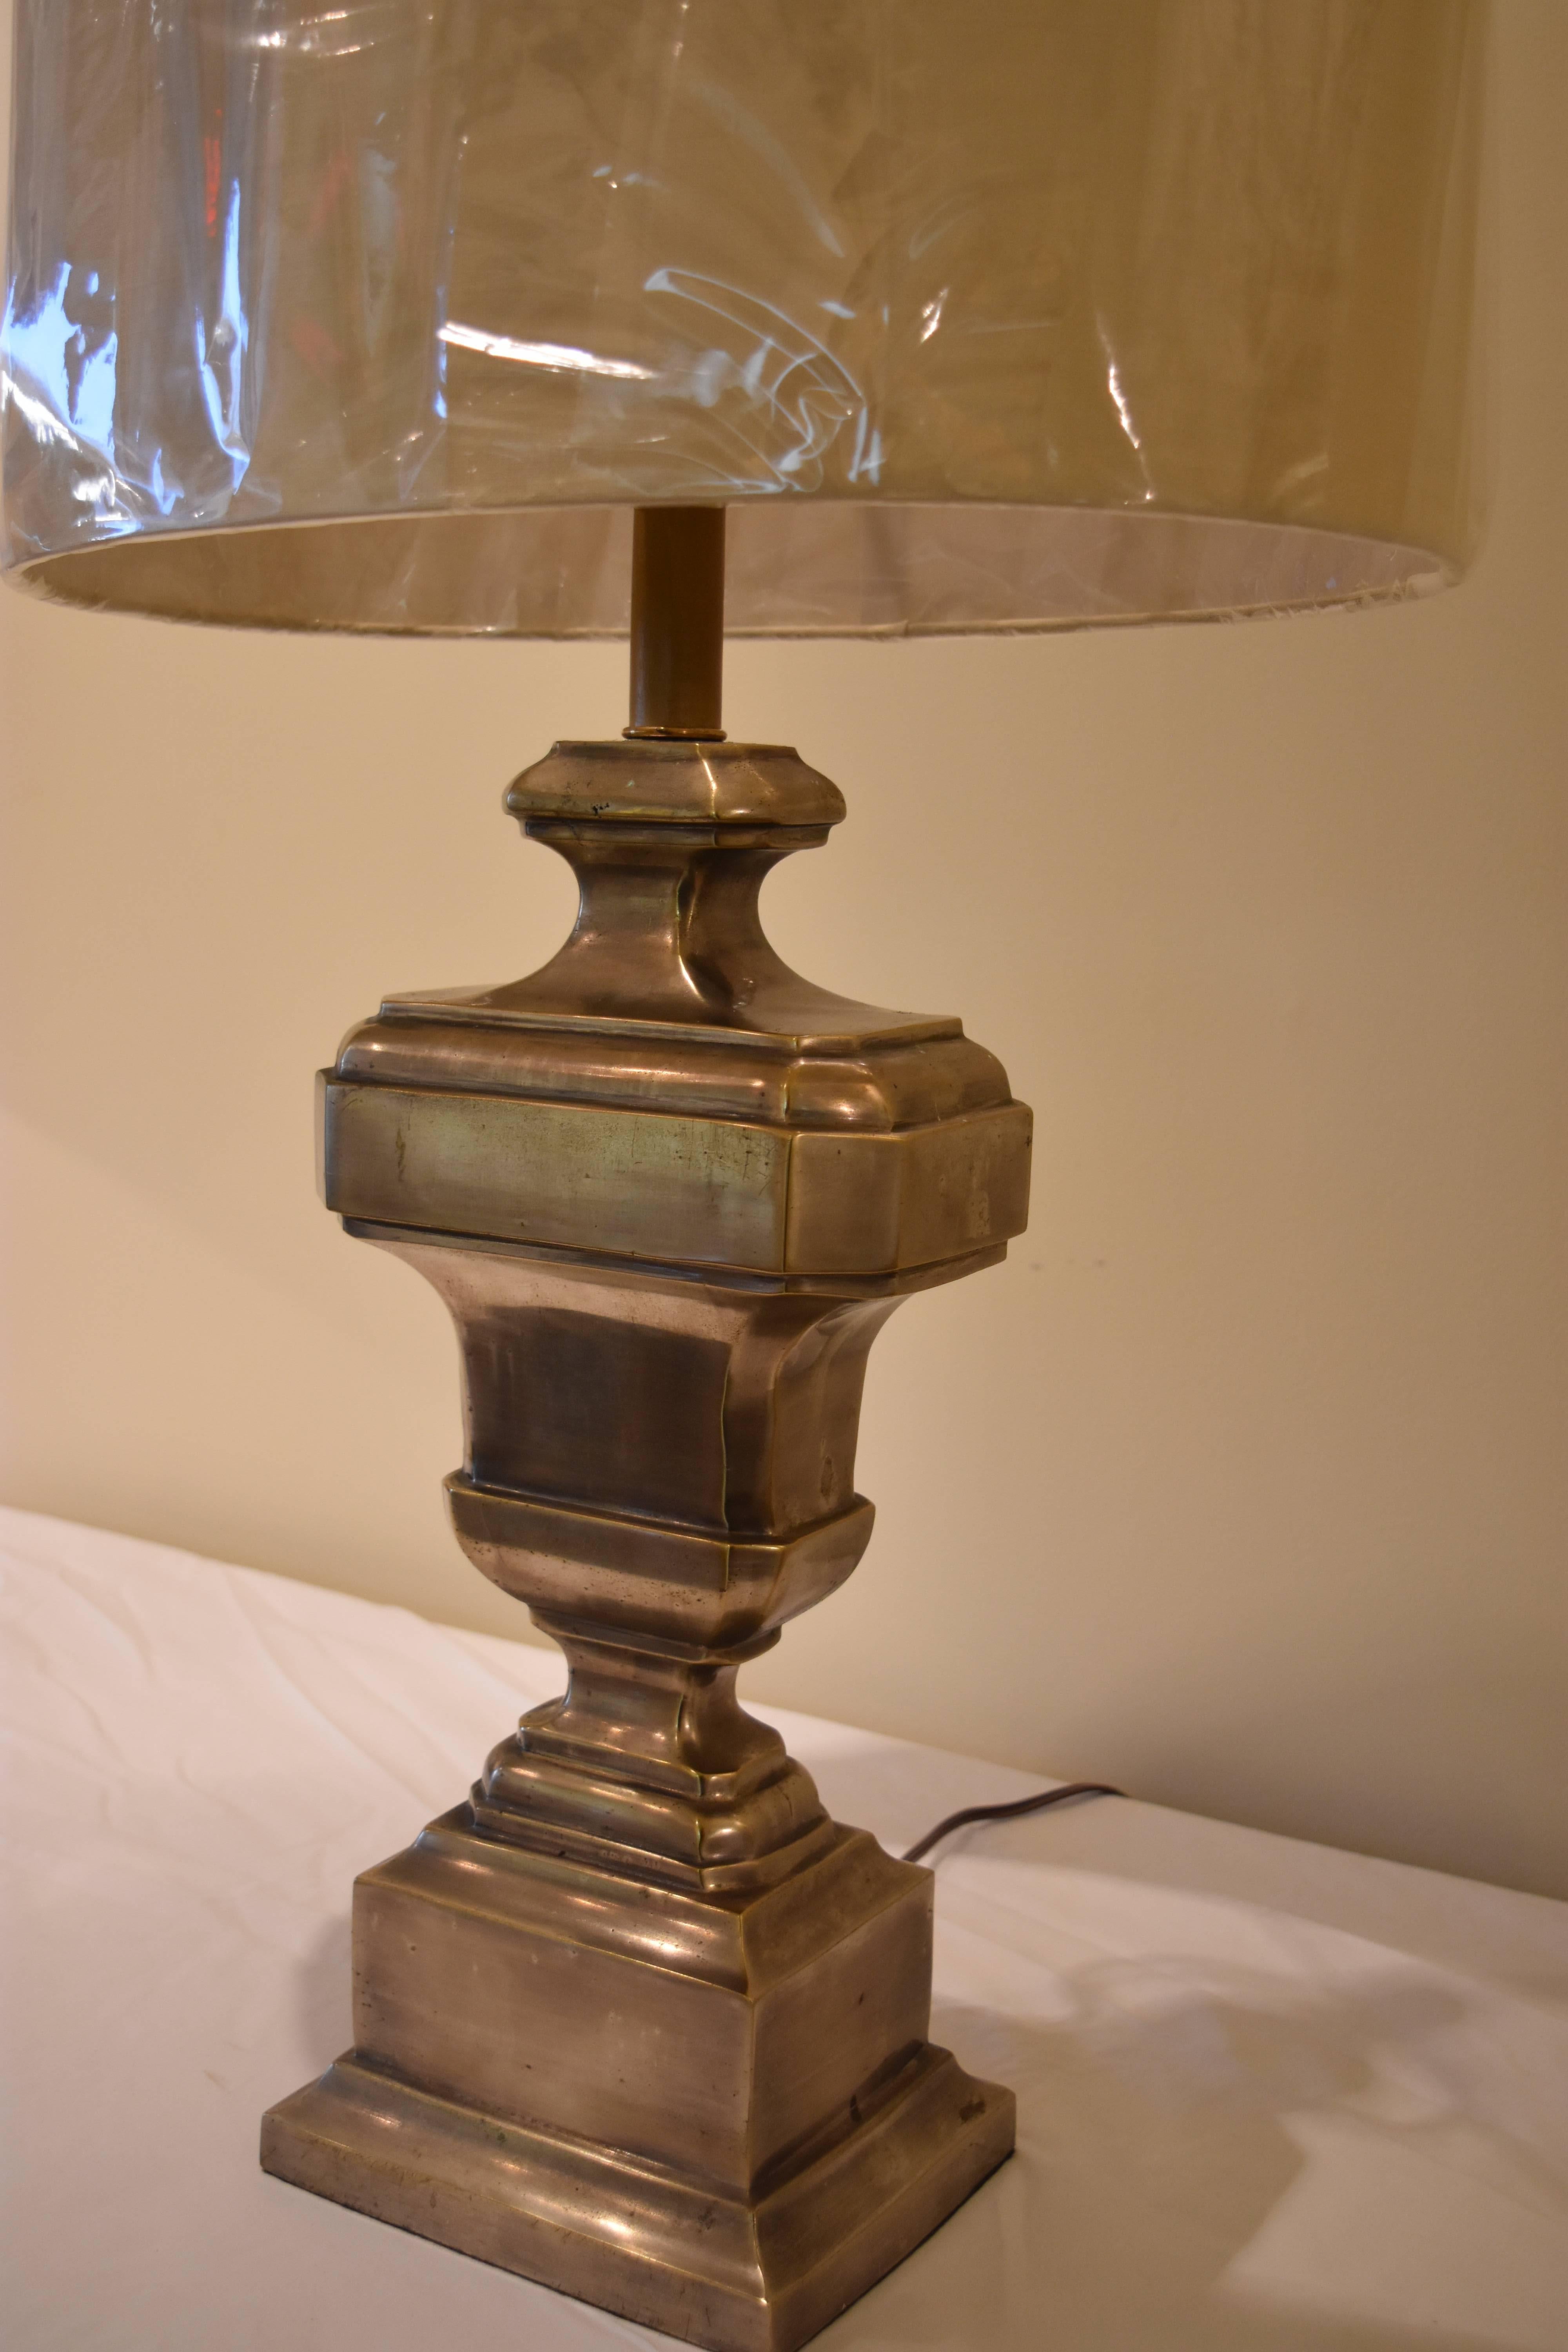 This vintage silvered bronze lamp from Paris has an urn shaped base and has been newly rewired for American use. The finish is a lovely warm silver and comes with this linen oval drum shaped shade.

Measurements with shade:
Shade width 16 inches